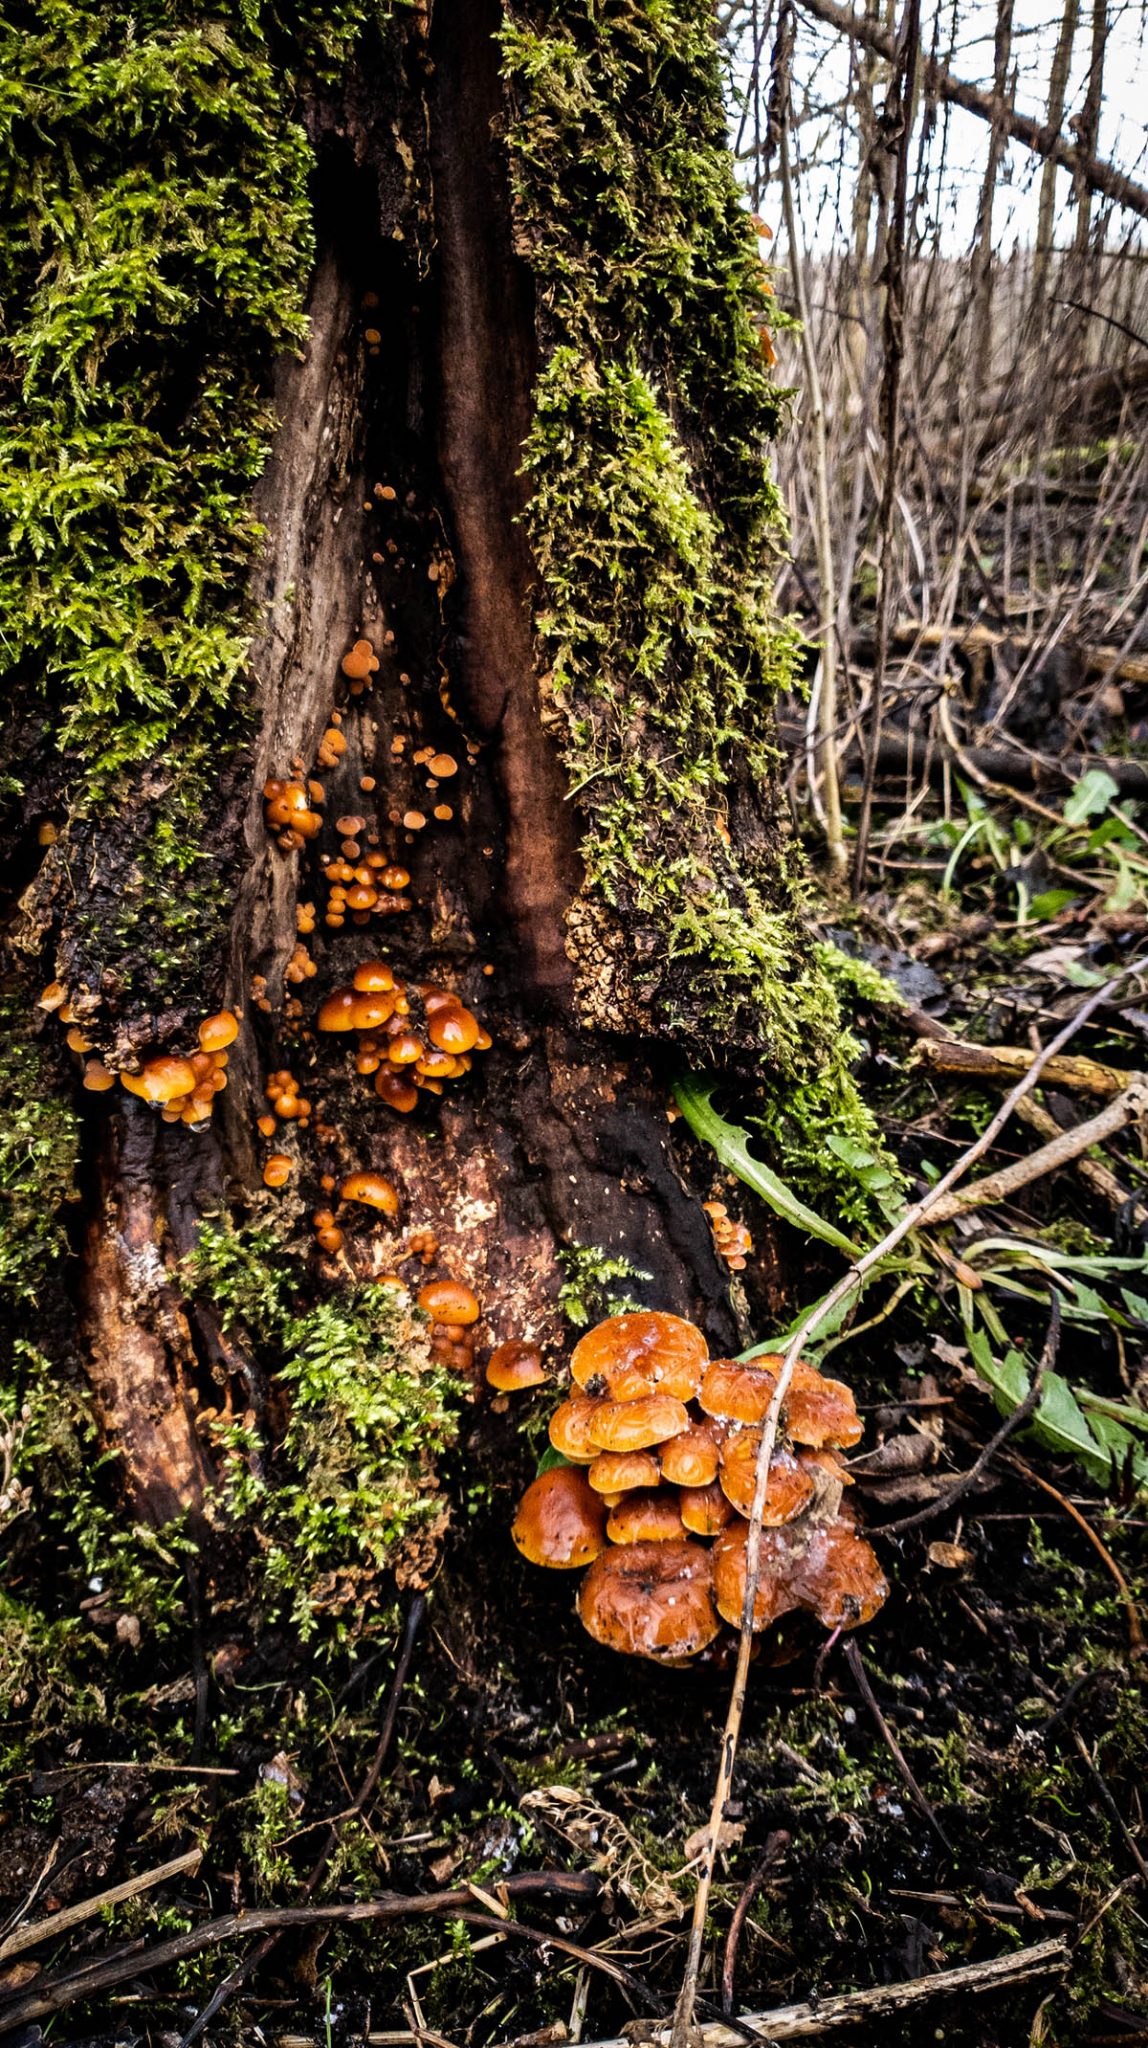 An opening in the base of a tree filled with mushrooms.